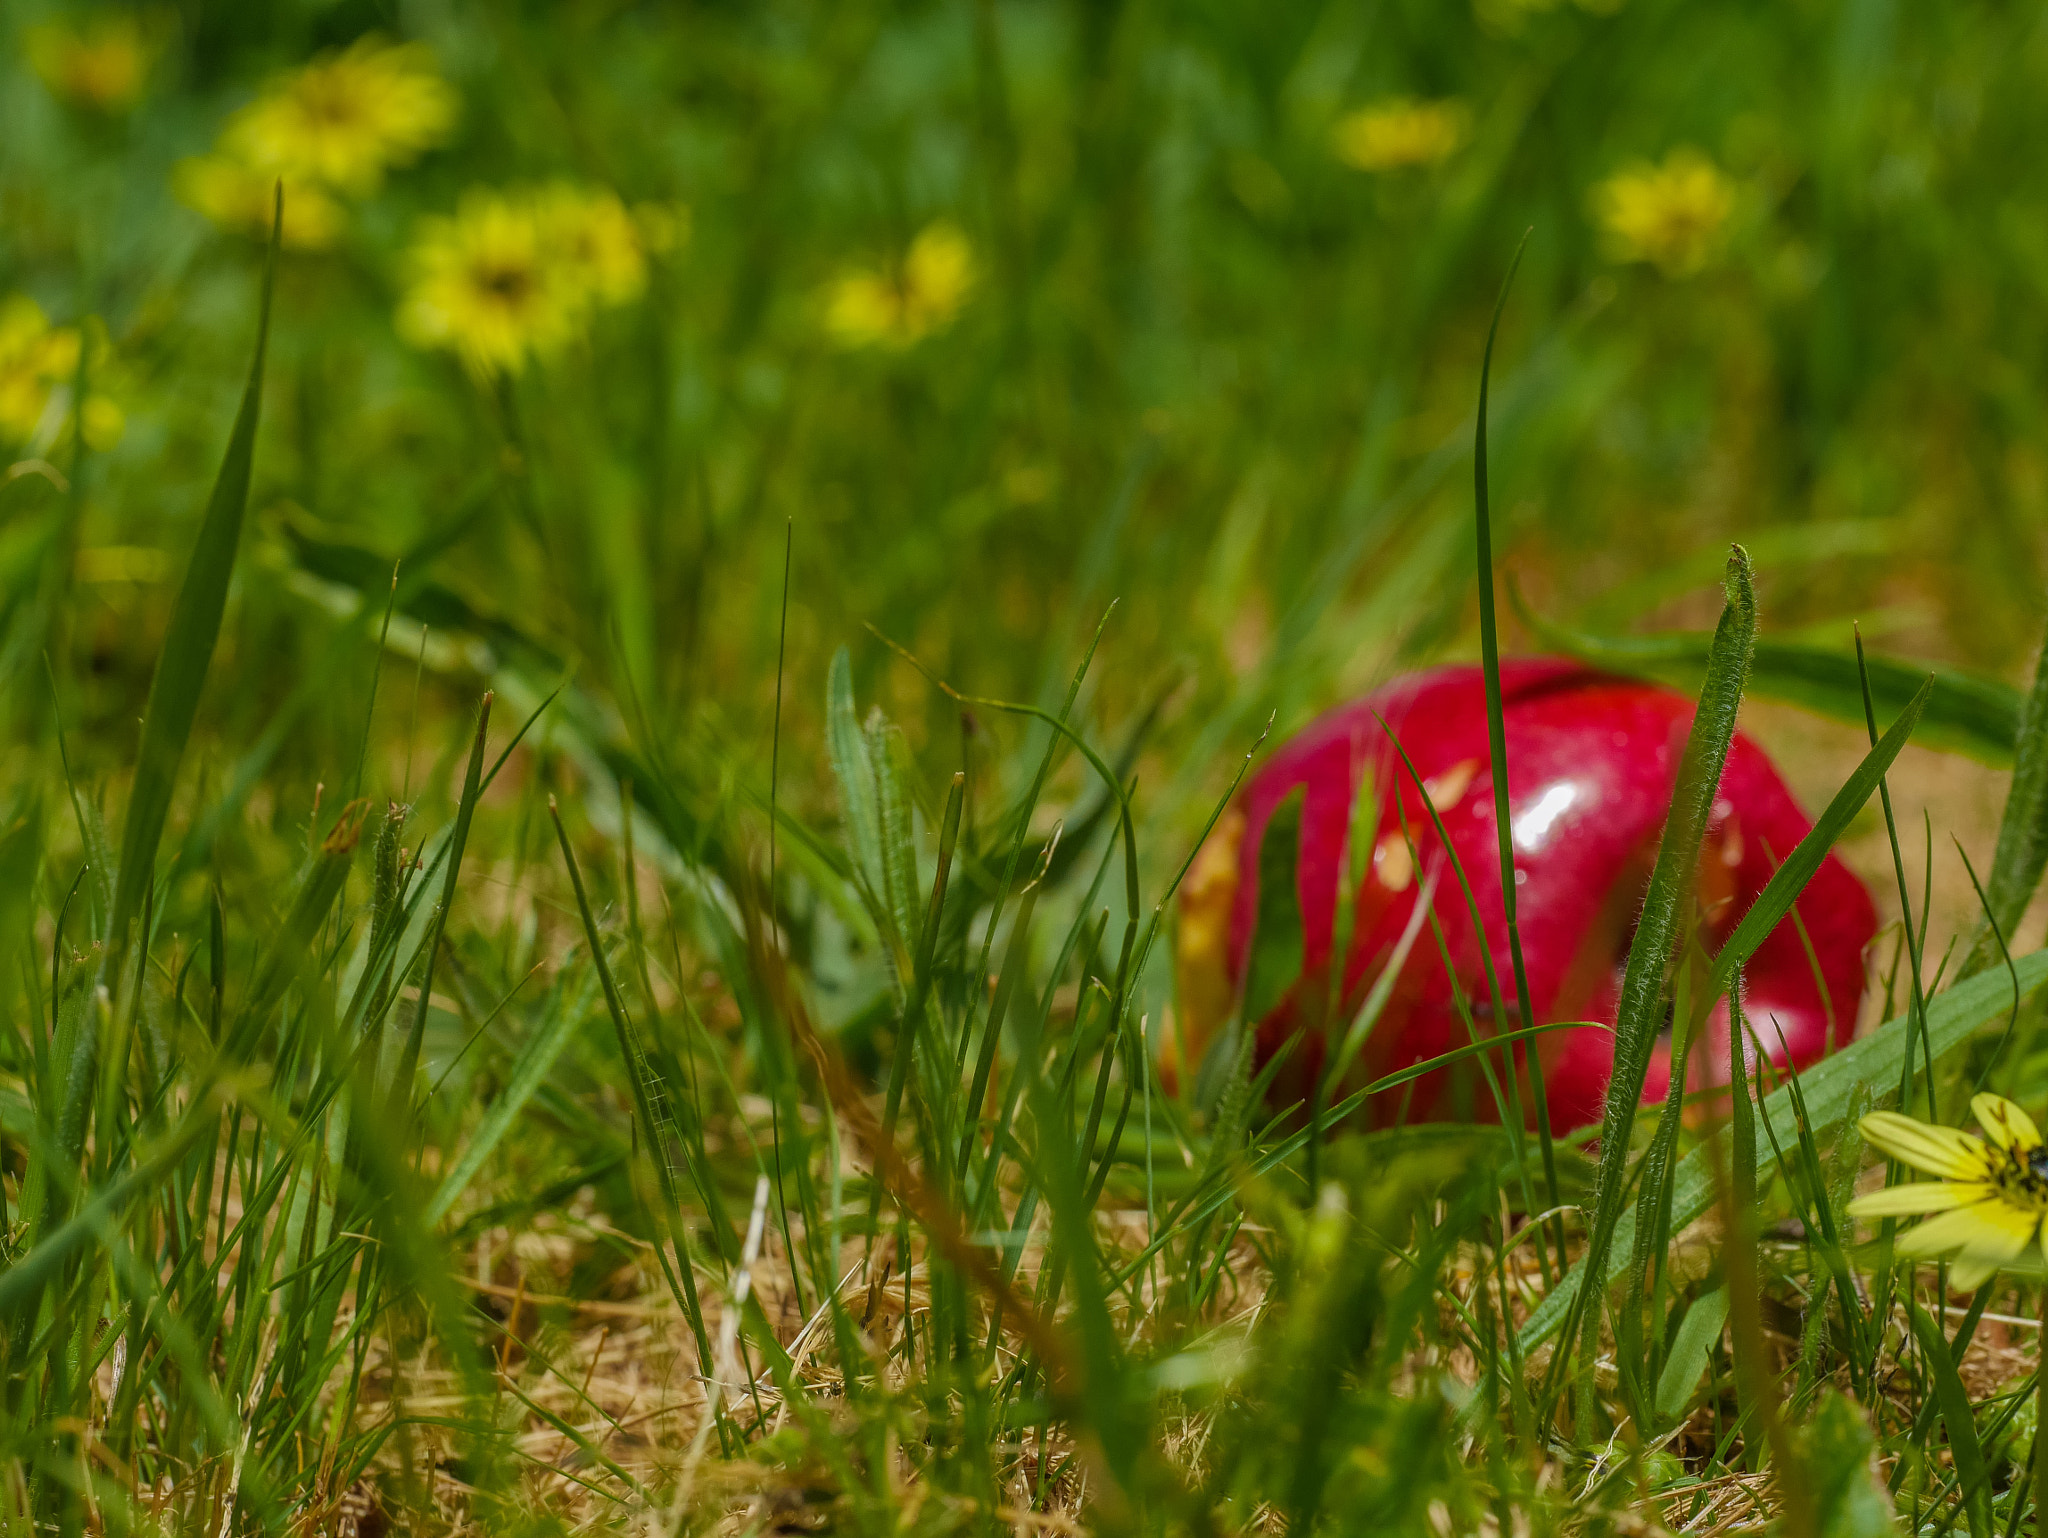 Panasonic DMC-GM1S sample photo. Discarded - half eaten apple discarded in a field of dandelions photography